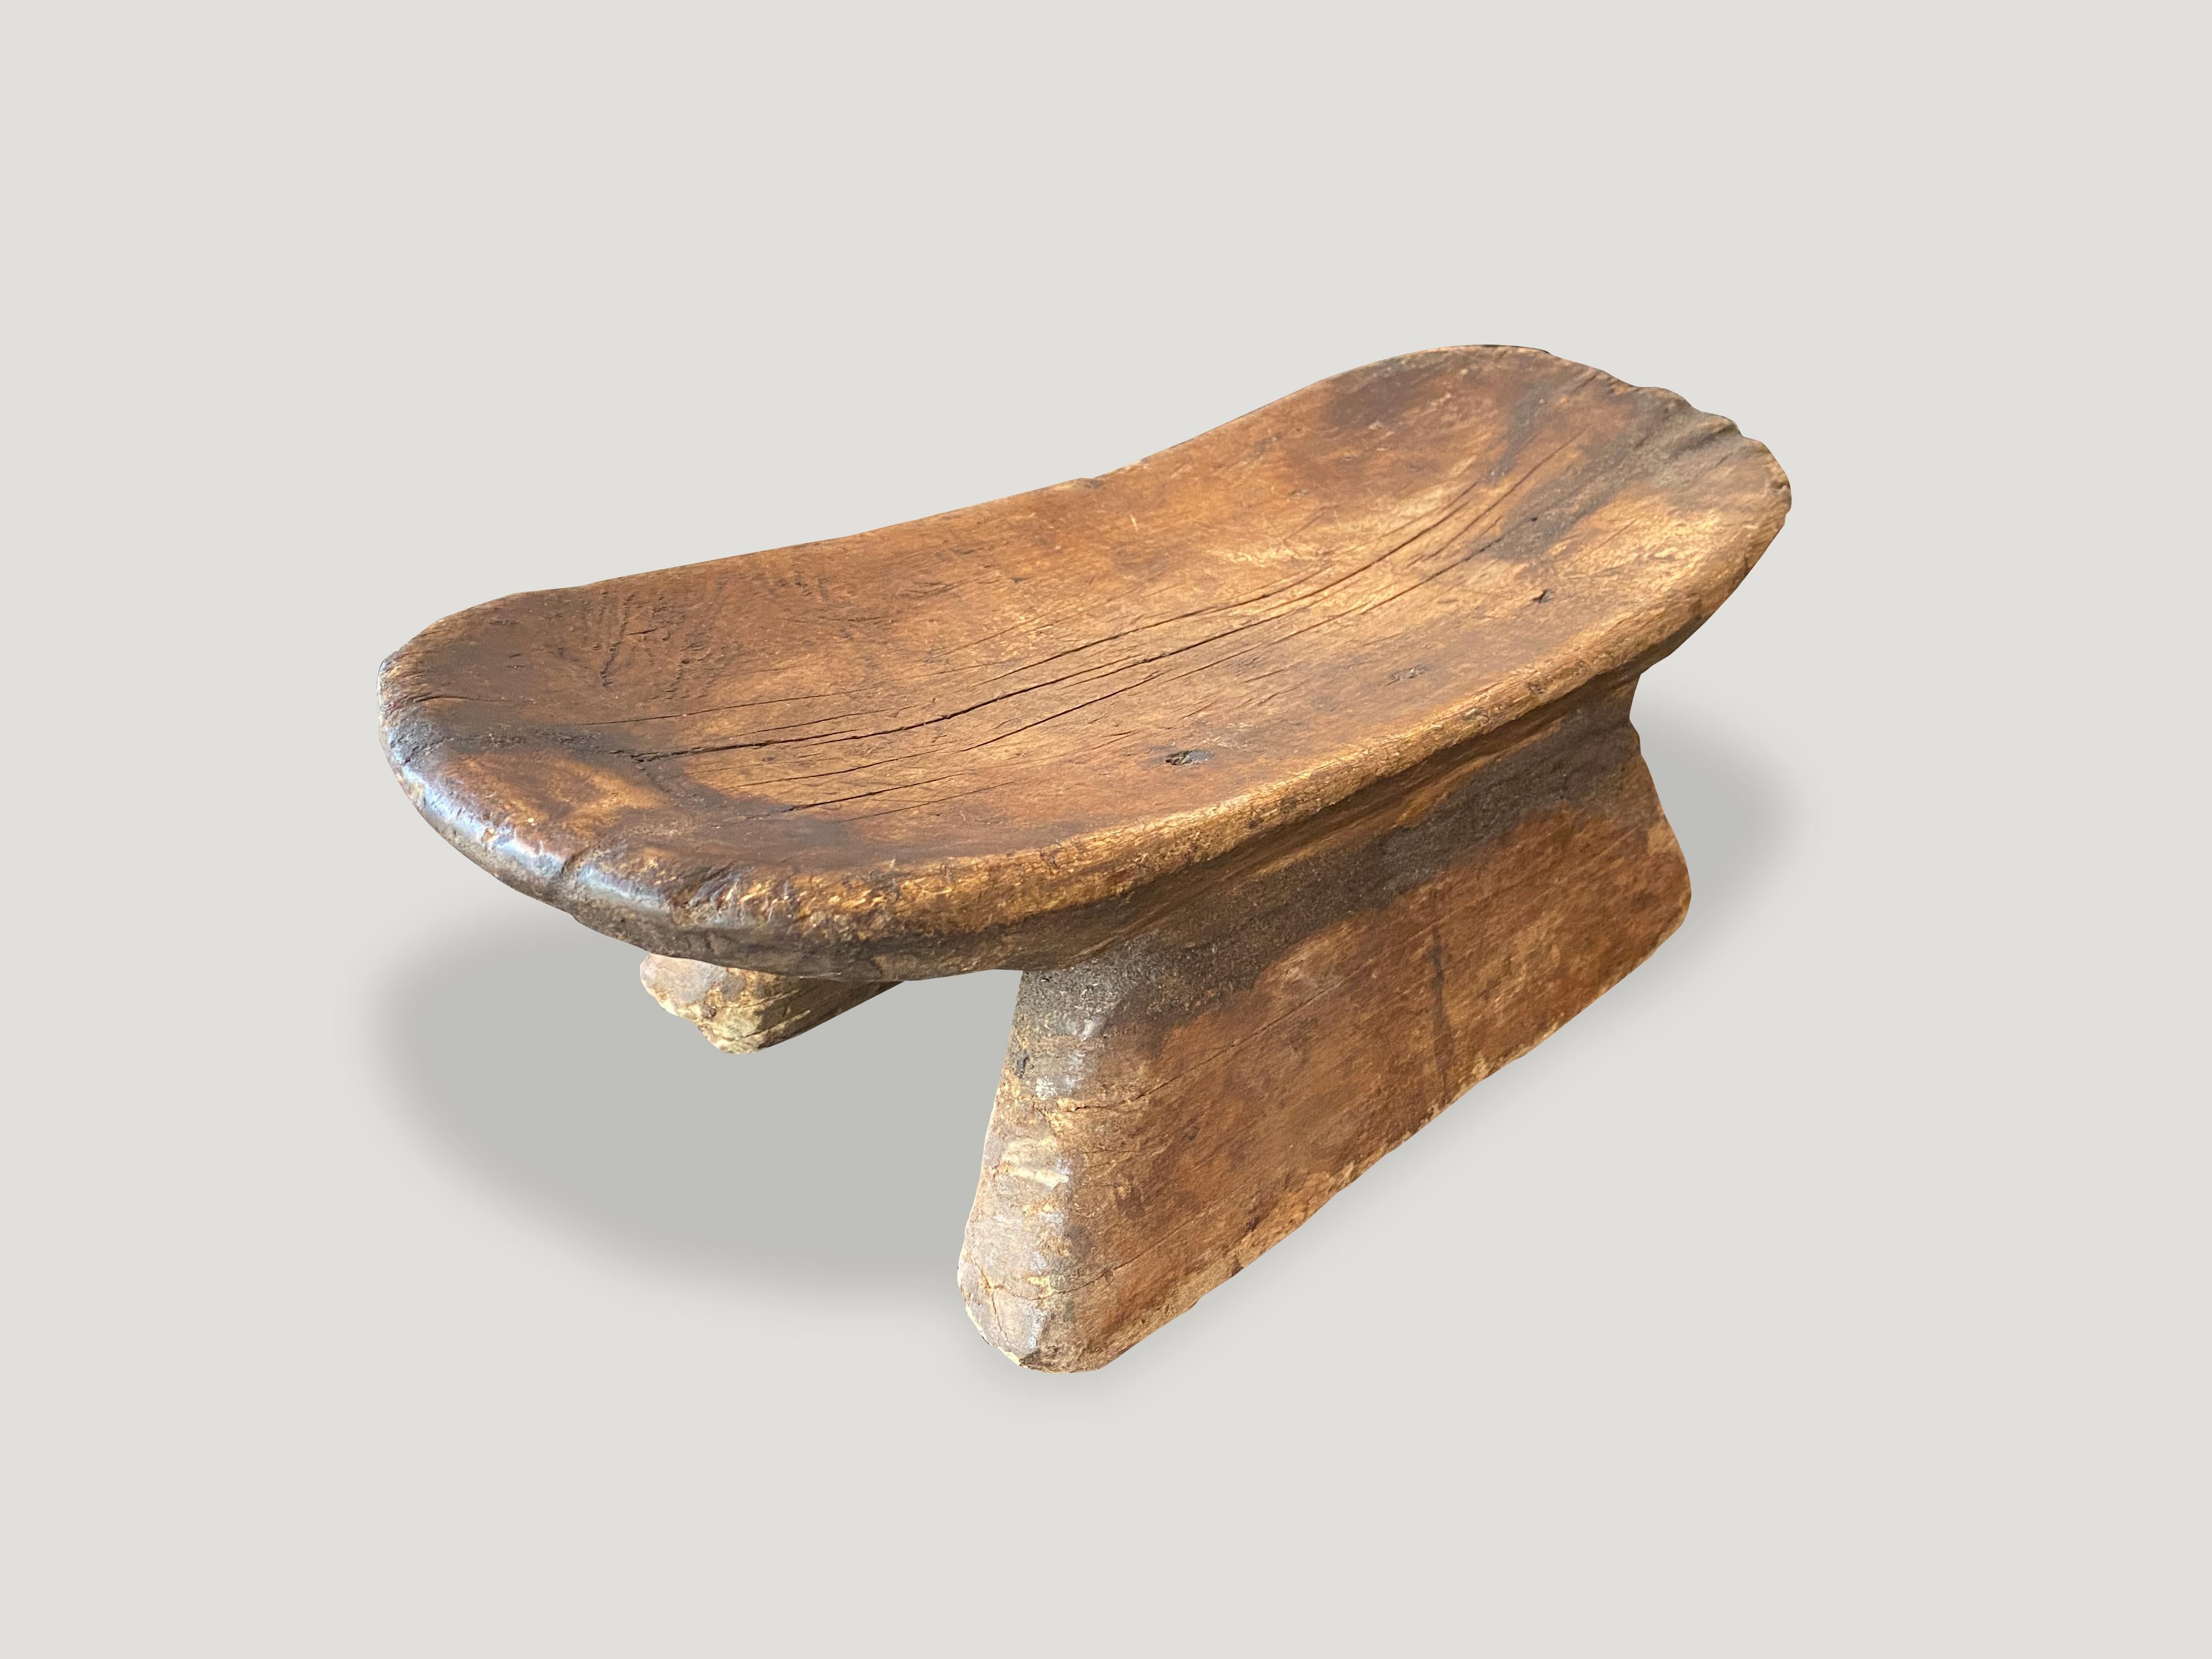 Traditional Lobi tribe head rest celebrating the cracks and crevices and all the other marks that time, weather, and loving use have left behind. Can also be used as a bowl.

This head rest was sourced in the spirit of wabi-sabi, a Japanese